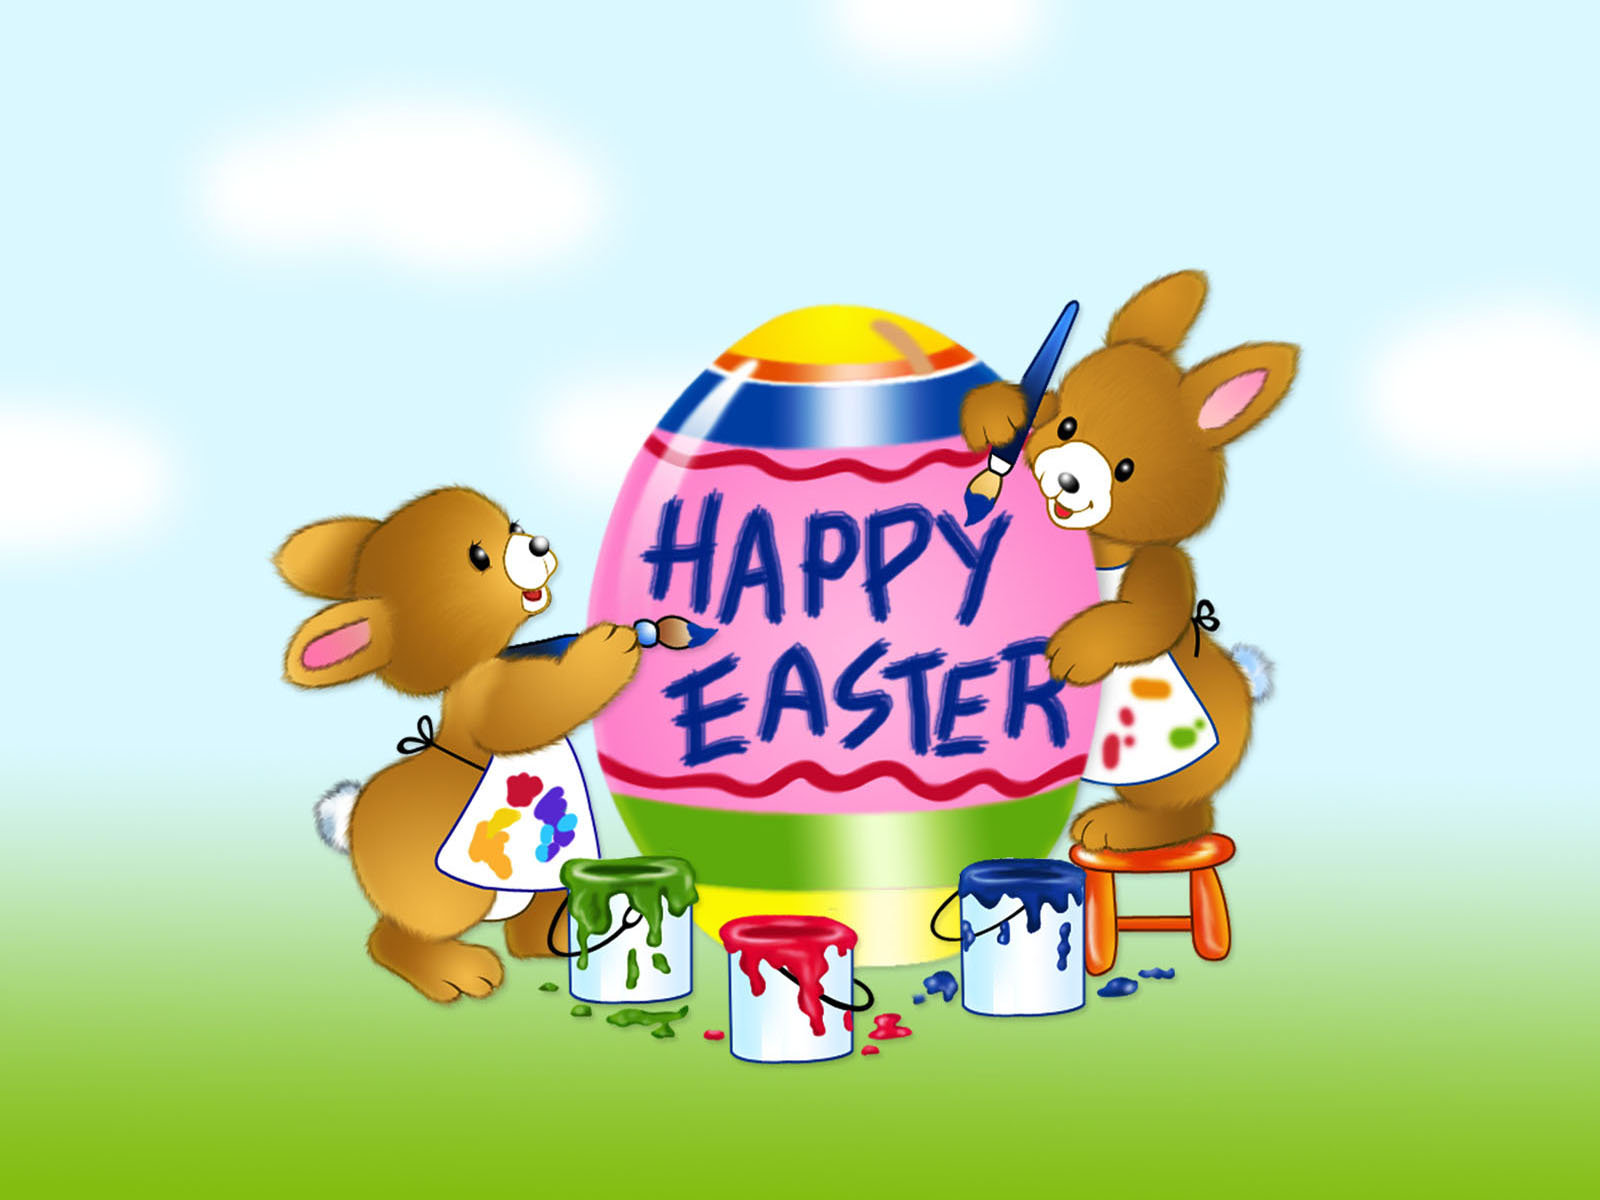 1500x1500 Easter Clip Art Wallpapers Hd Lowrider Car Pictures